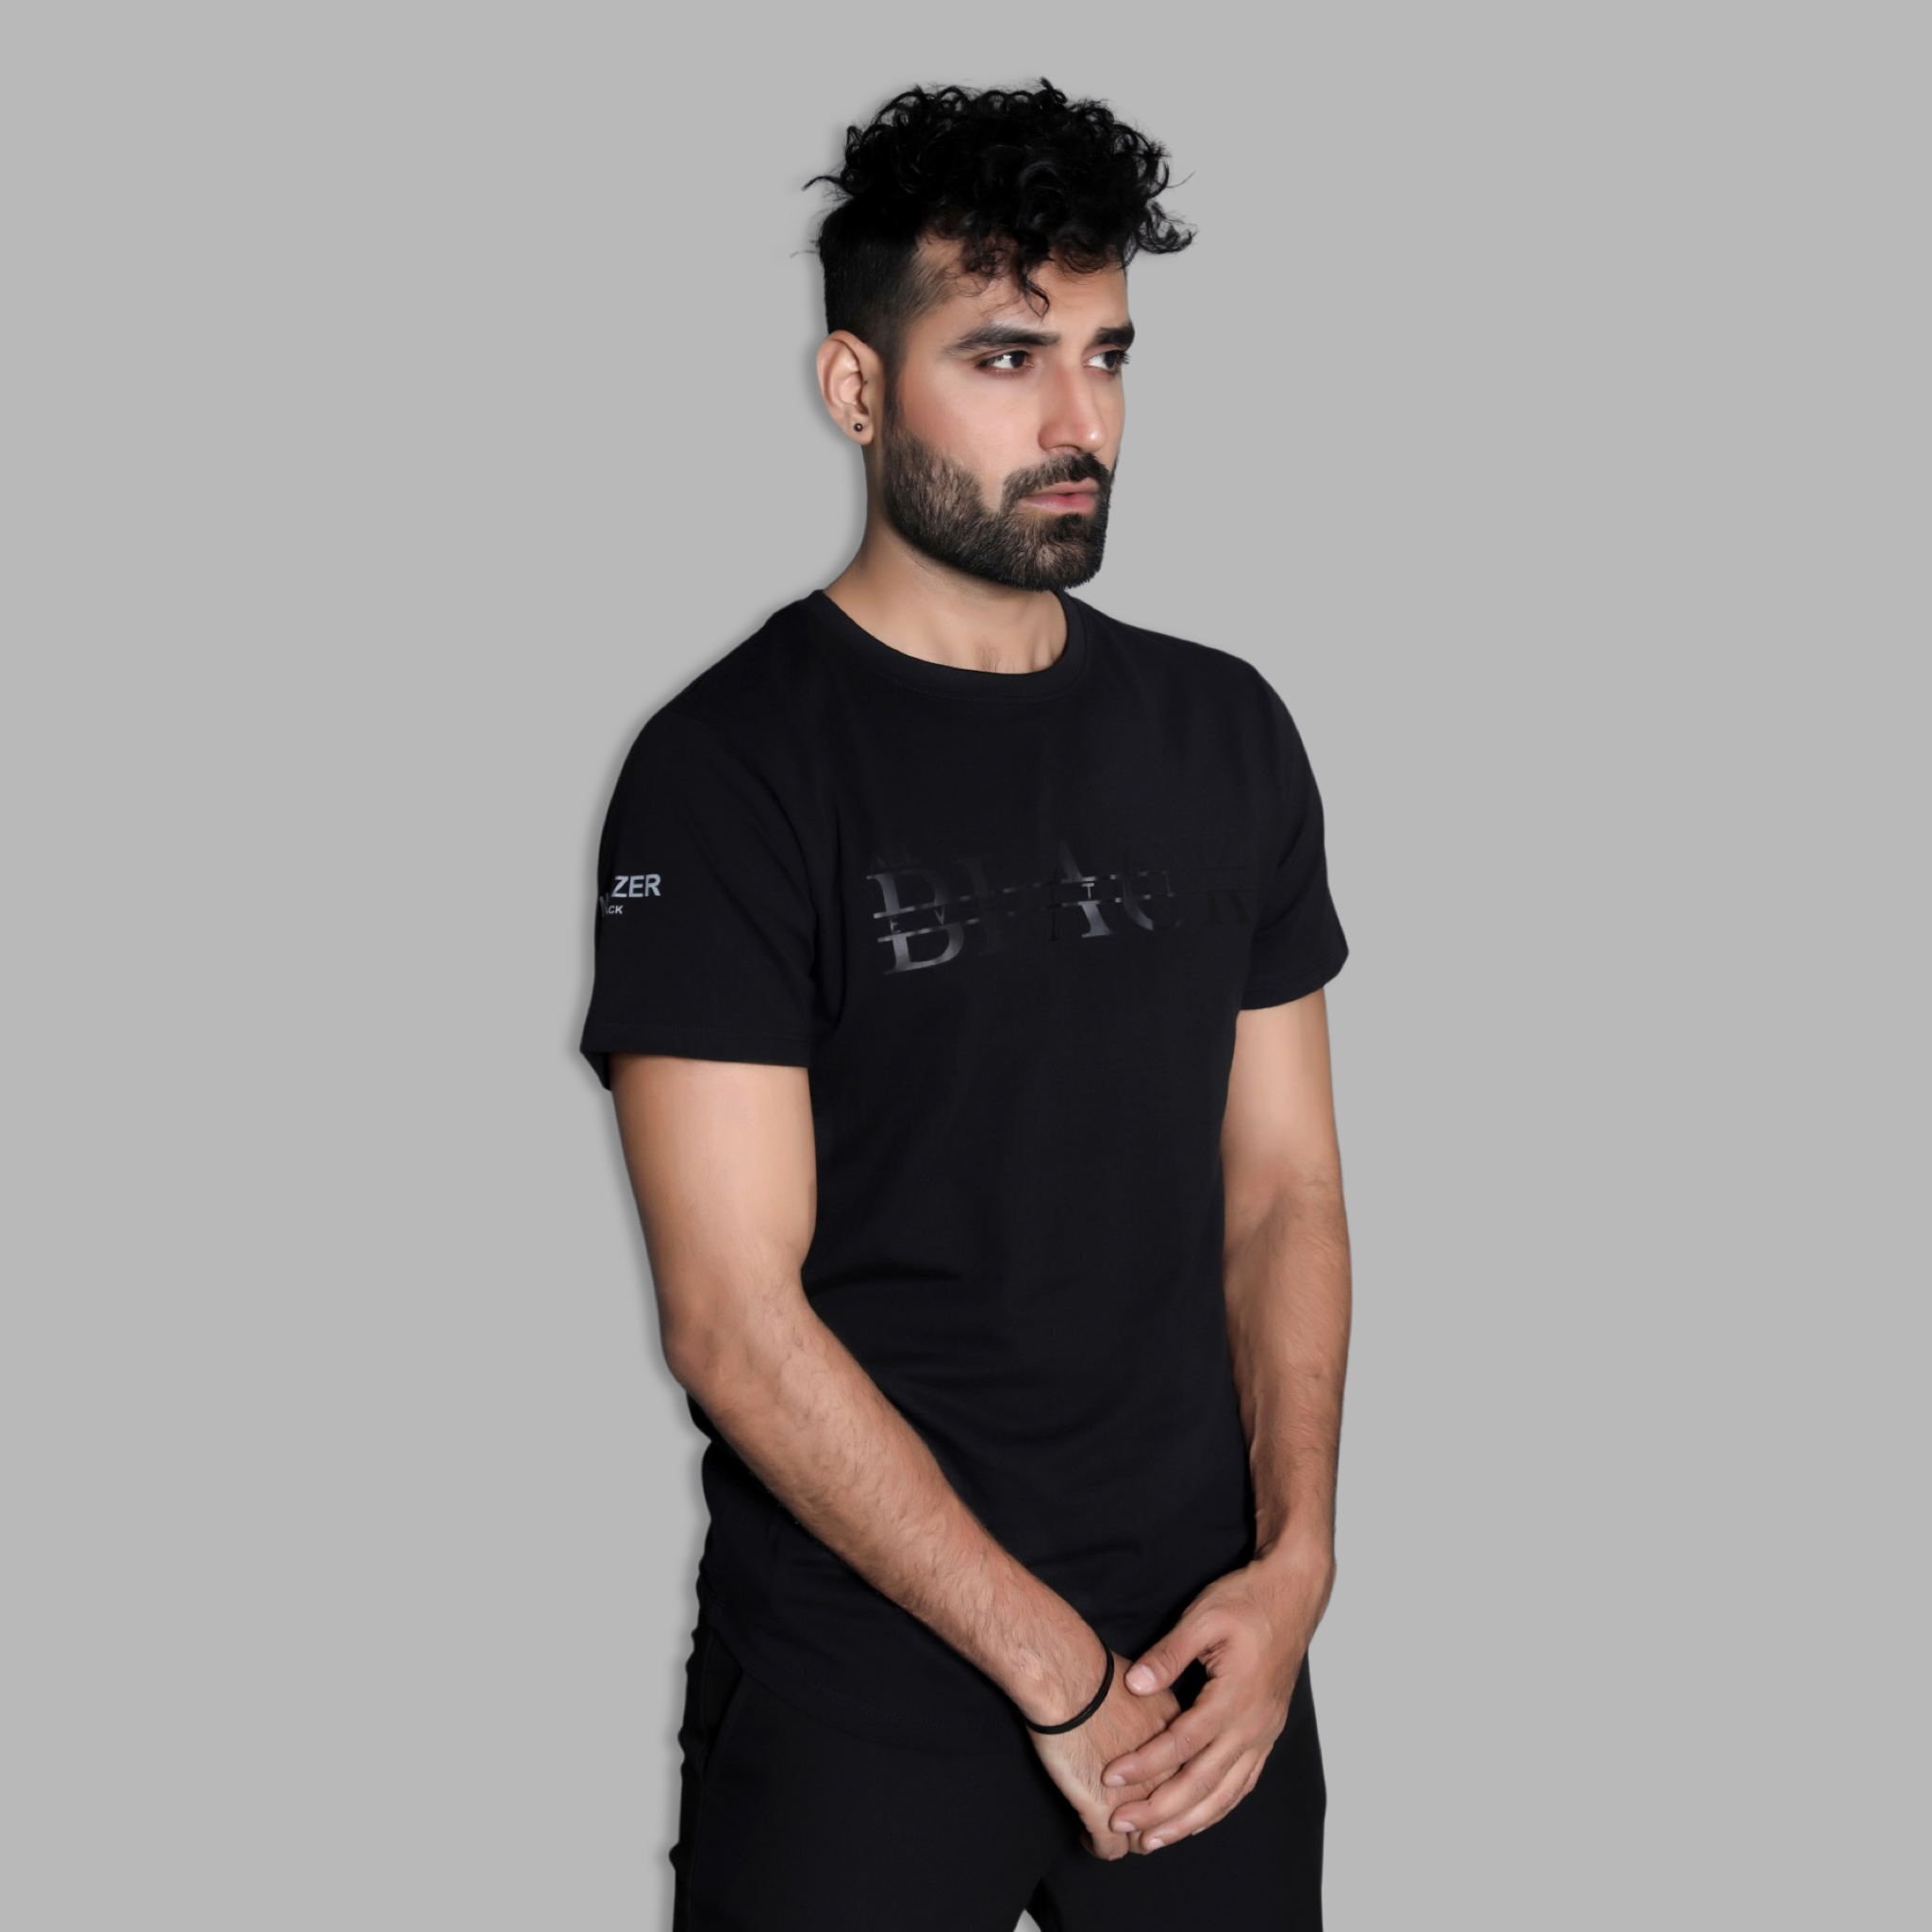 All Black Everything tee